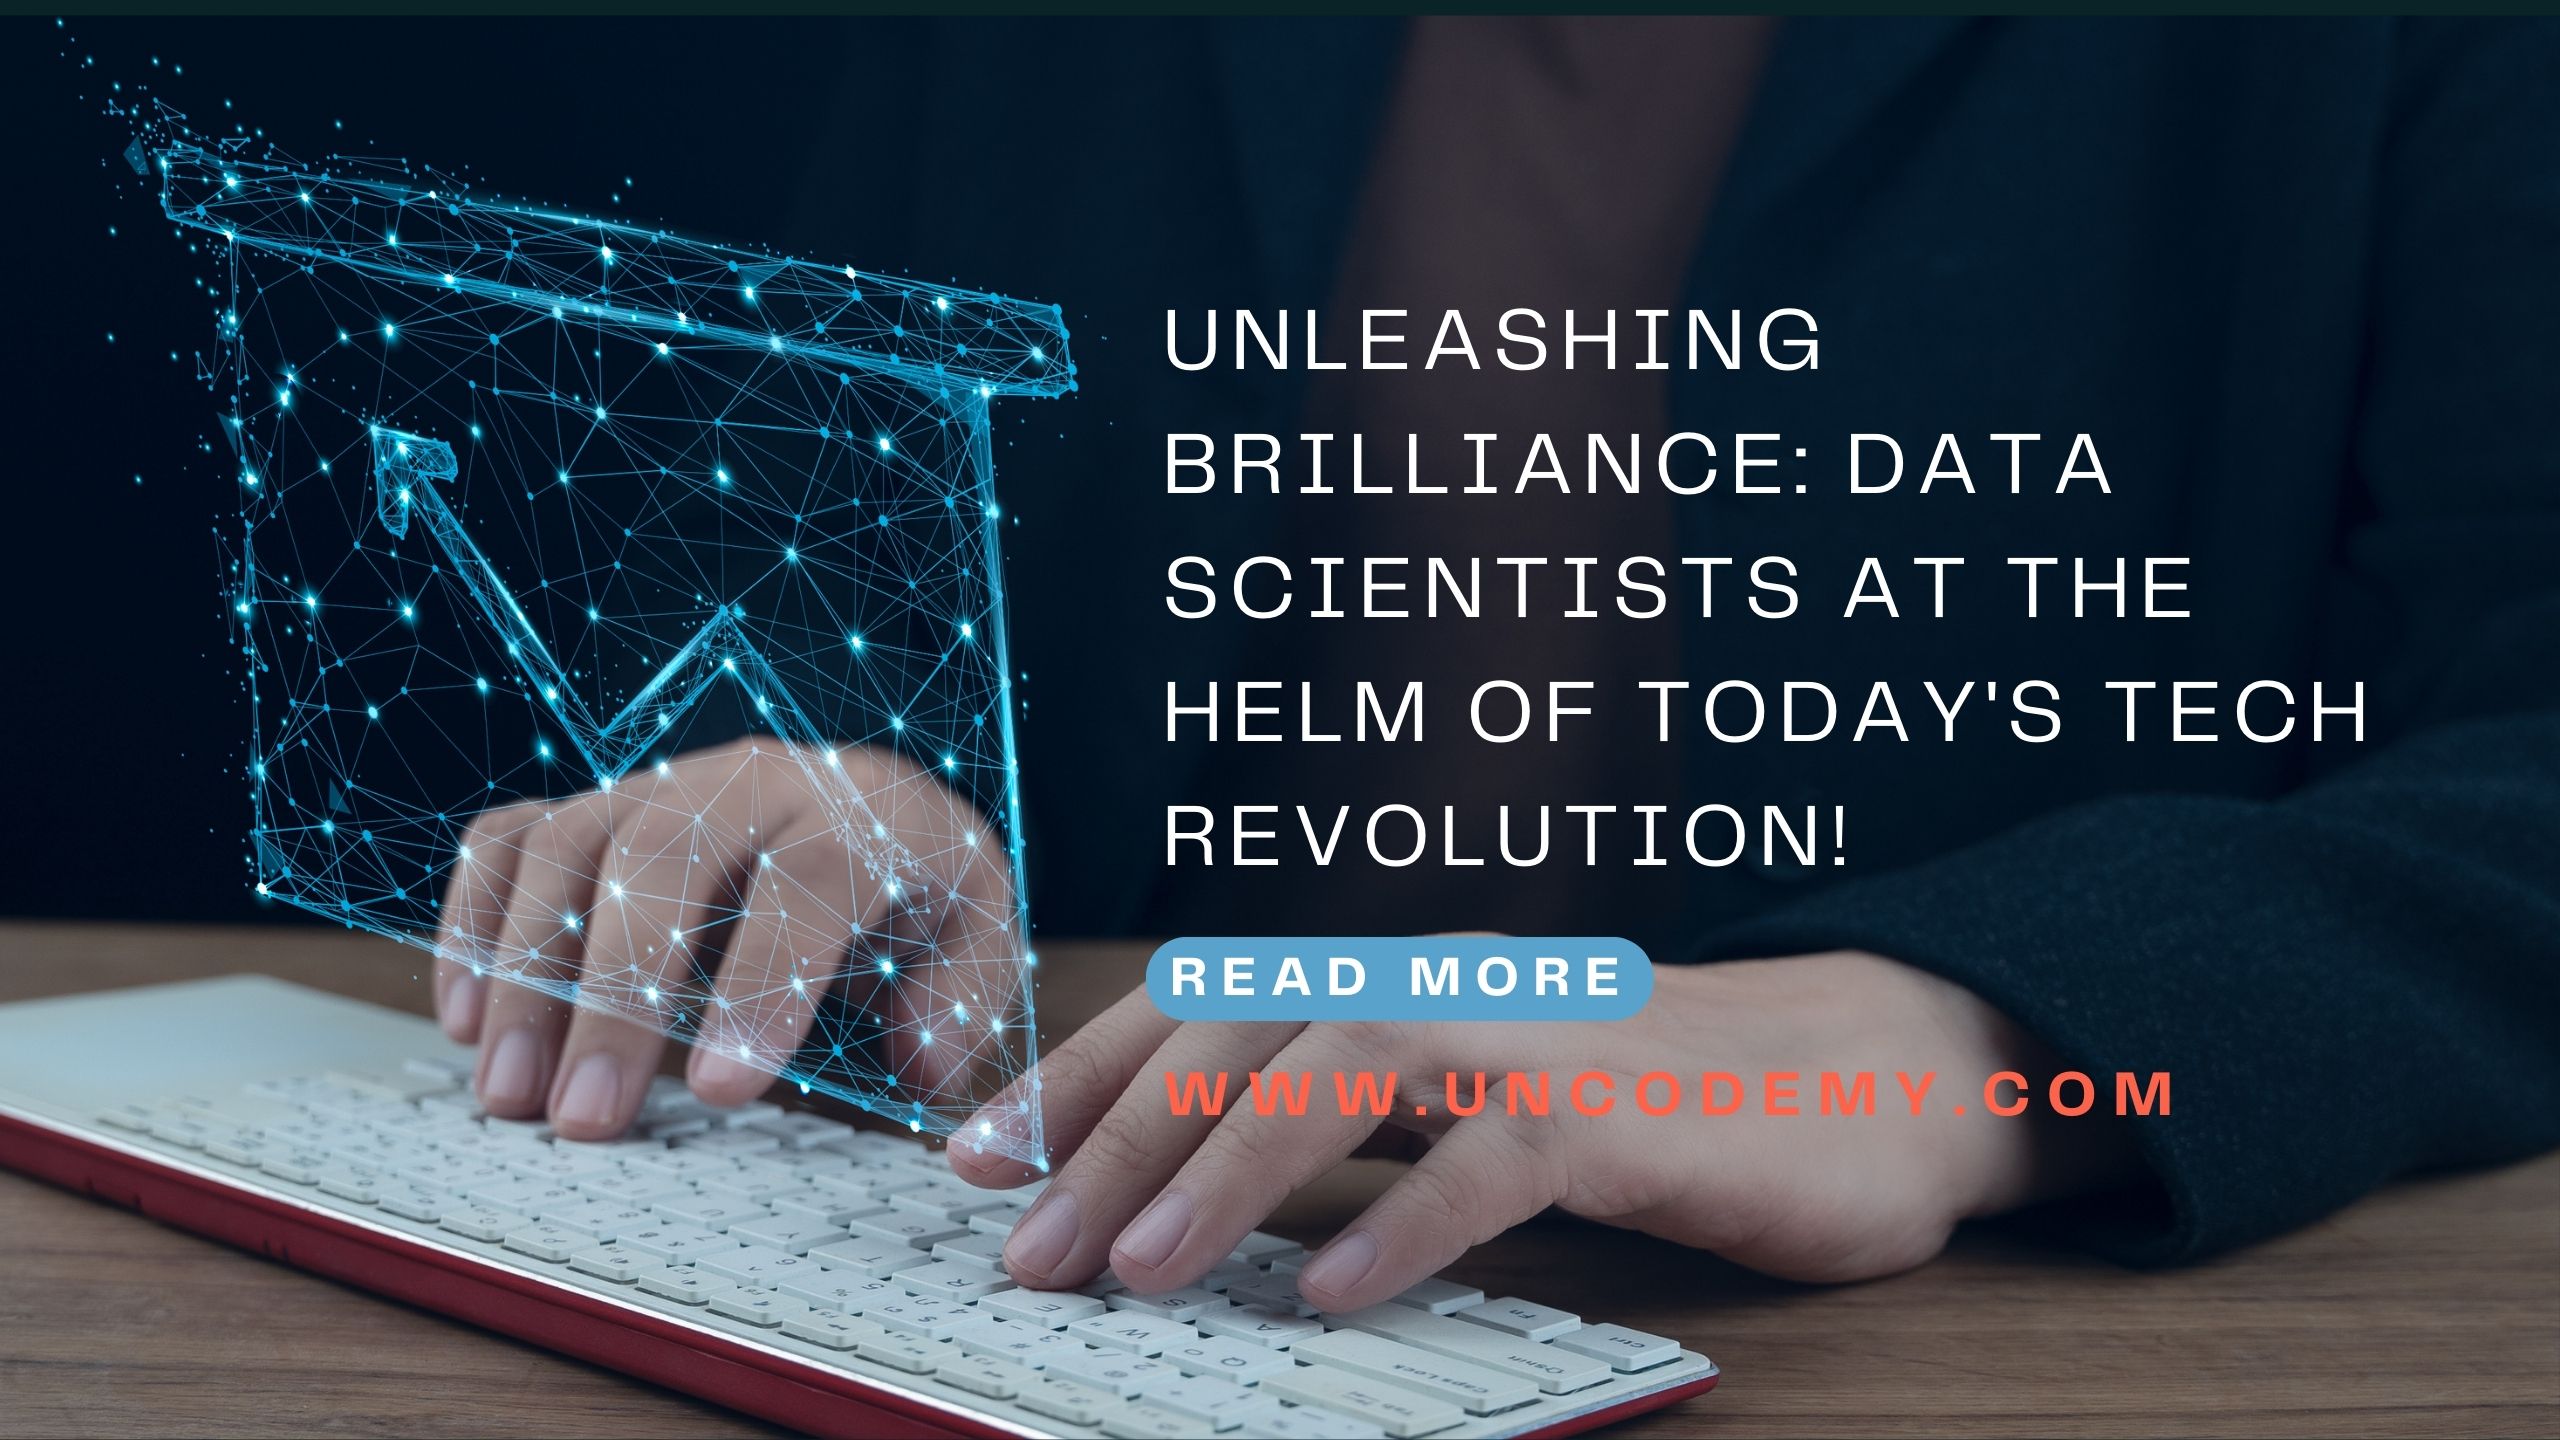 Unleashing Brilliance: Data Scientists at the Helm of Today’s Tech Revolution!